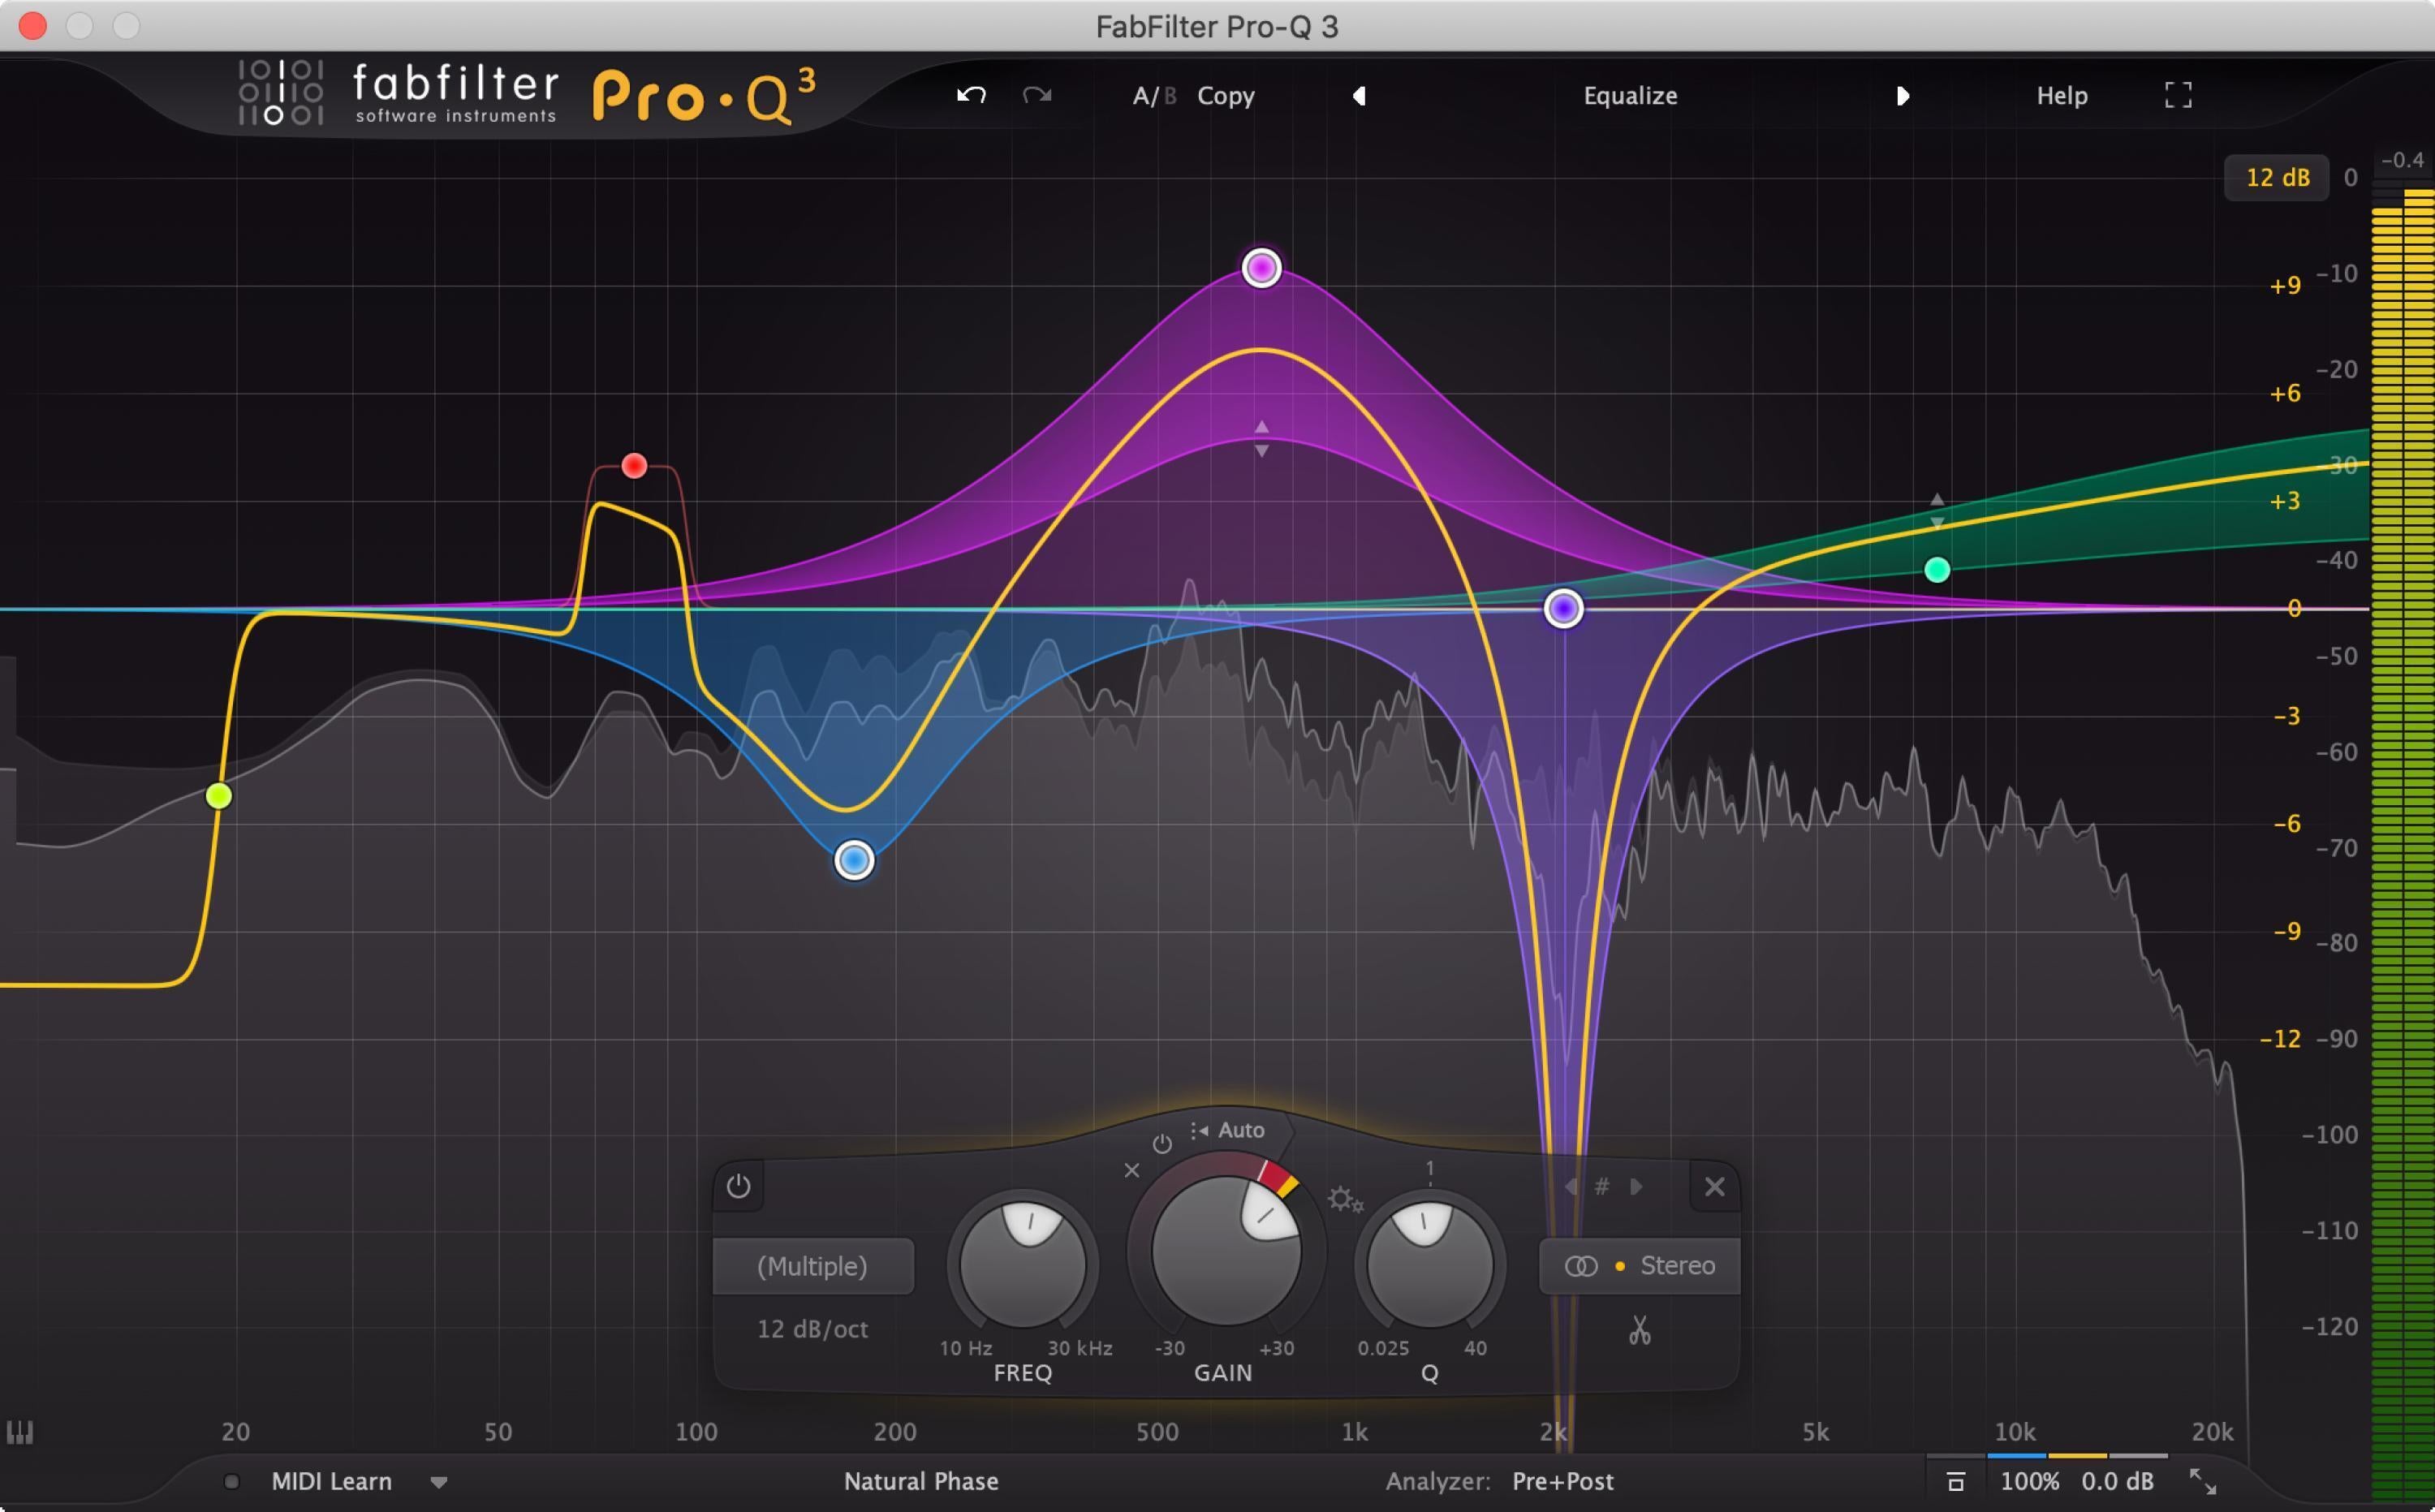 Bundled Item: FabFilter Pro-Q 3 EQ and Filter Plug-in